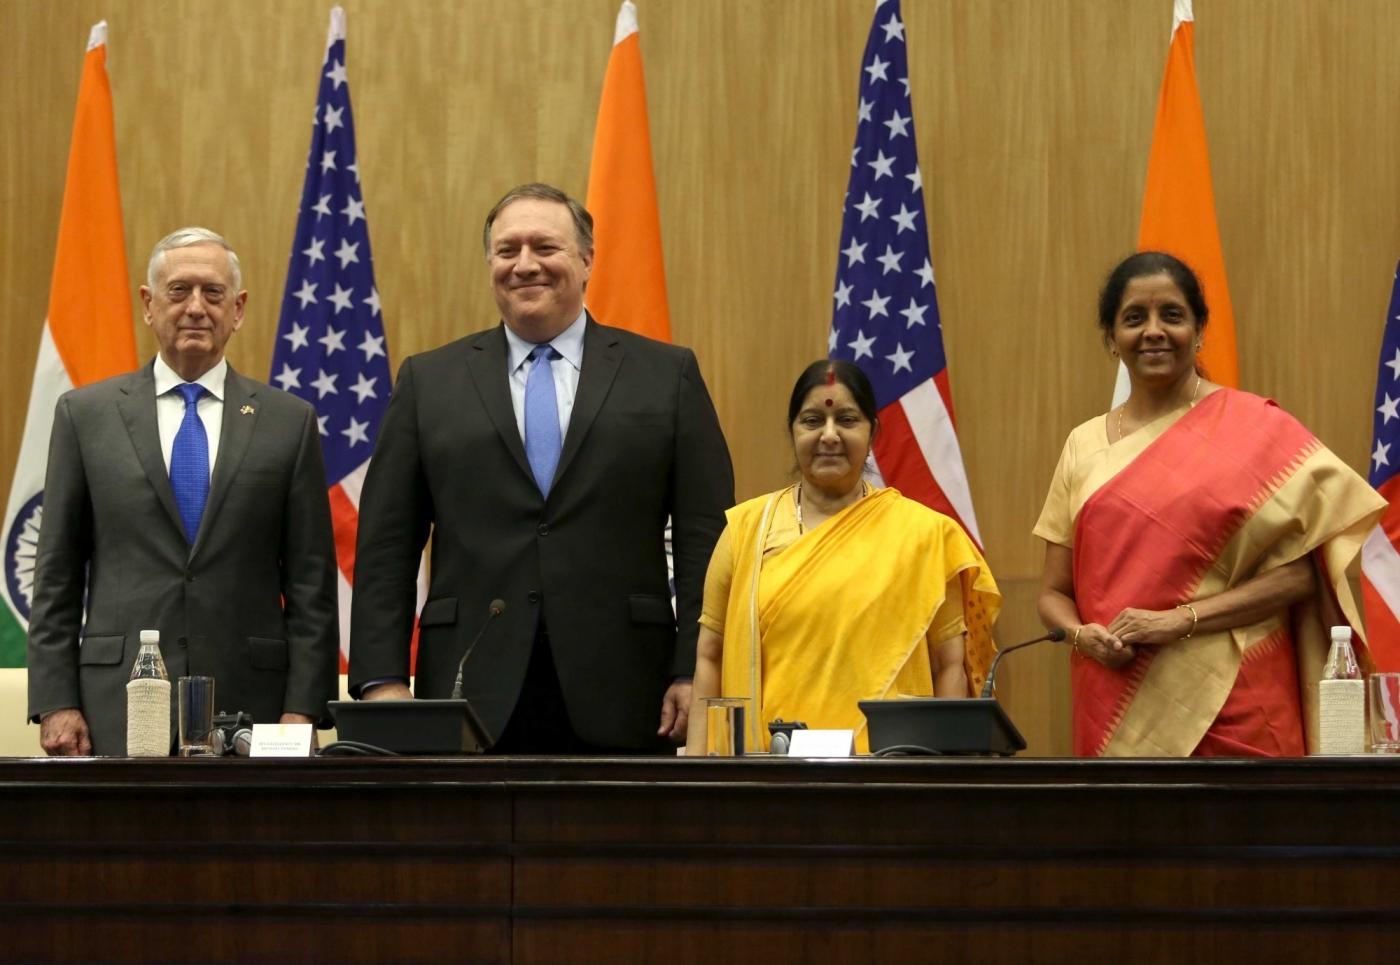 New Delhi: External Affairs Minister Sushma Swaraj and Defence Minister Nirmala Sitharaman with US Secretary of State Mike Pompeo and Defence Secretary James Mattis during a press briefing after the India-US 2+2 Strategic Dialogue meeting, in New Delhi on Sept 6, 2018. (Photo: IANS/DPRO) by .